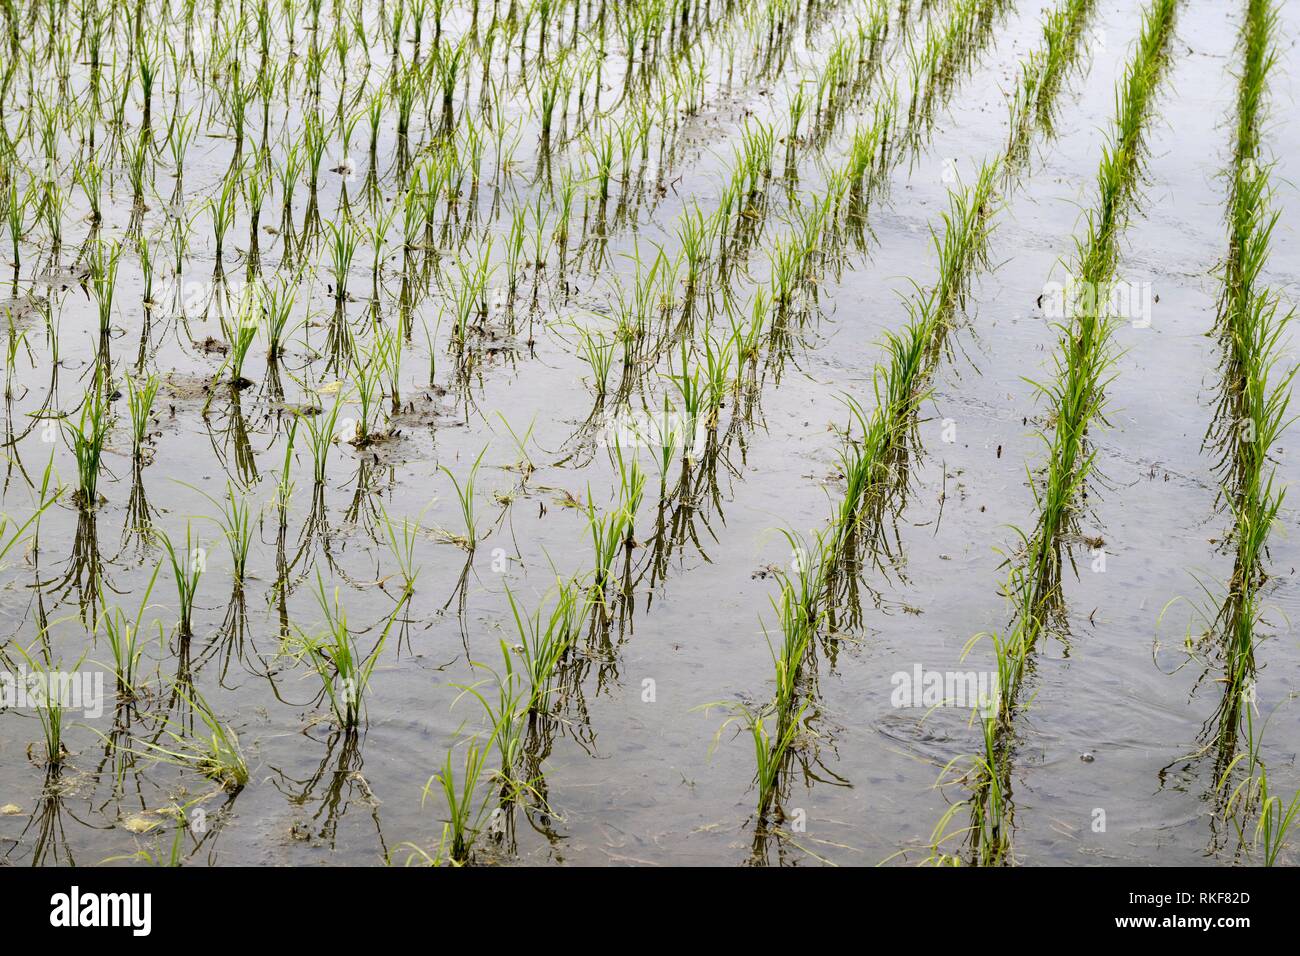 Rice field with green young plants in spring, Hotaka, Japan. Stock Photo